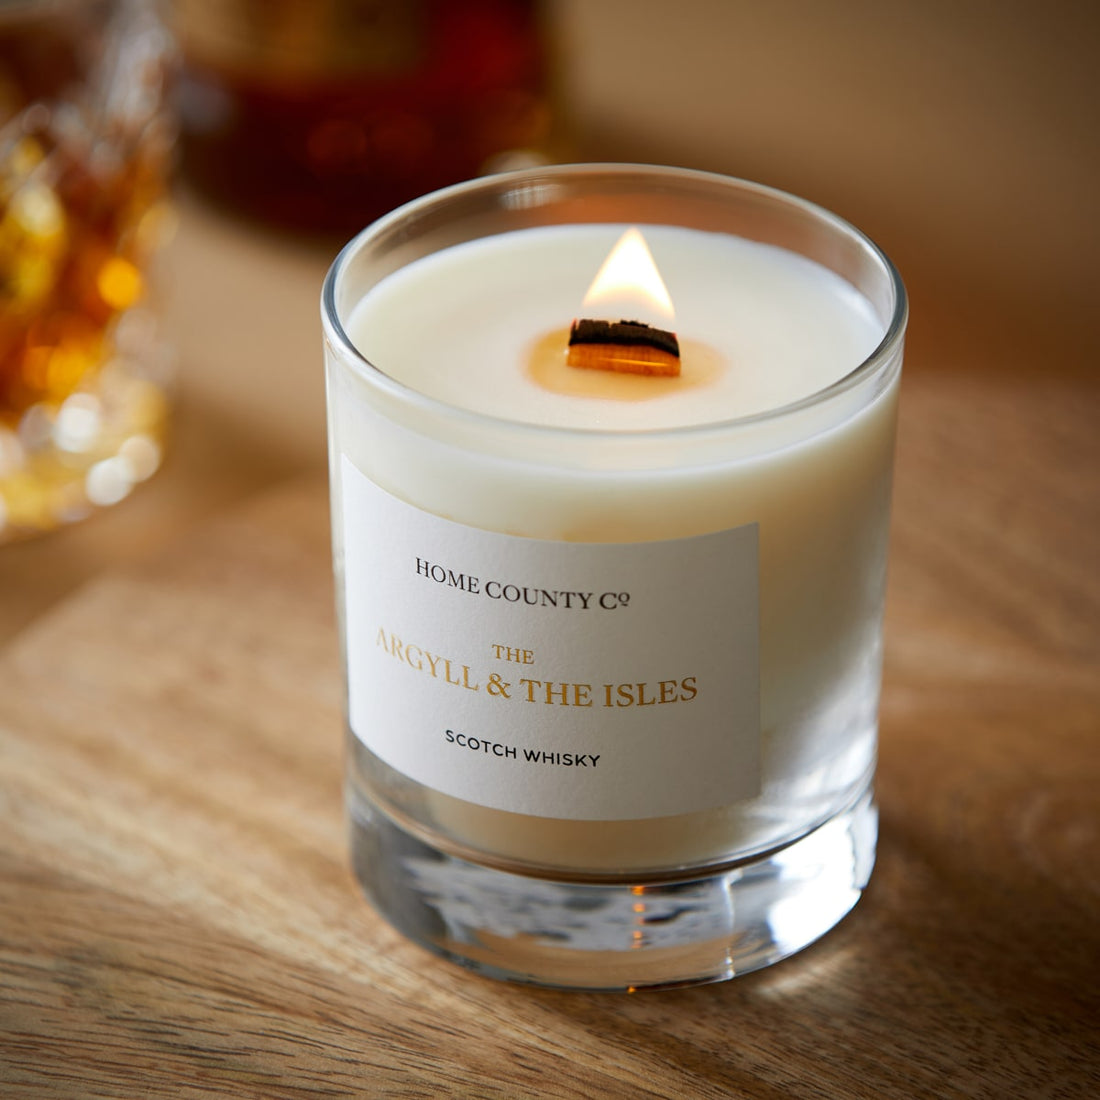 Masculine scented candles for the man in your life